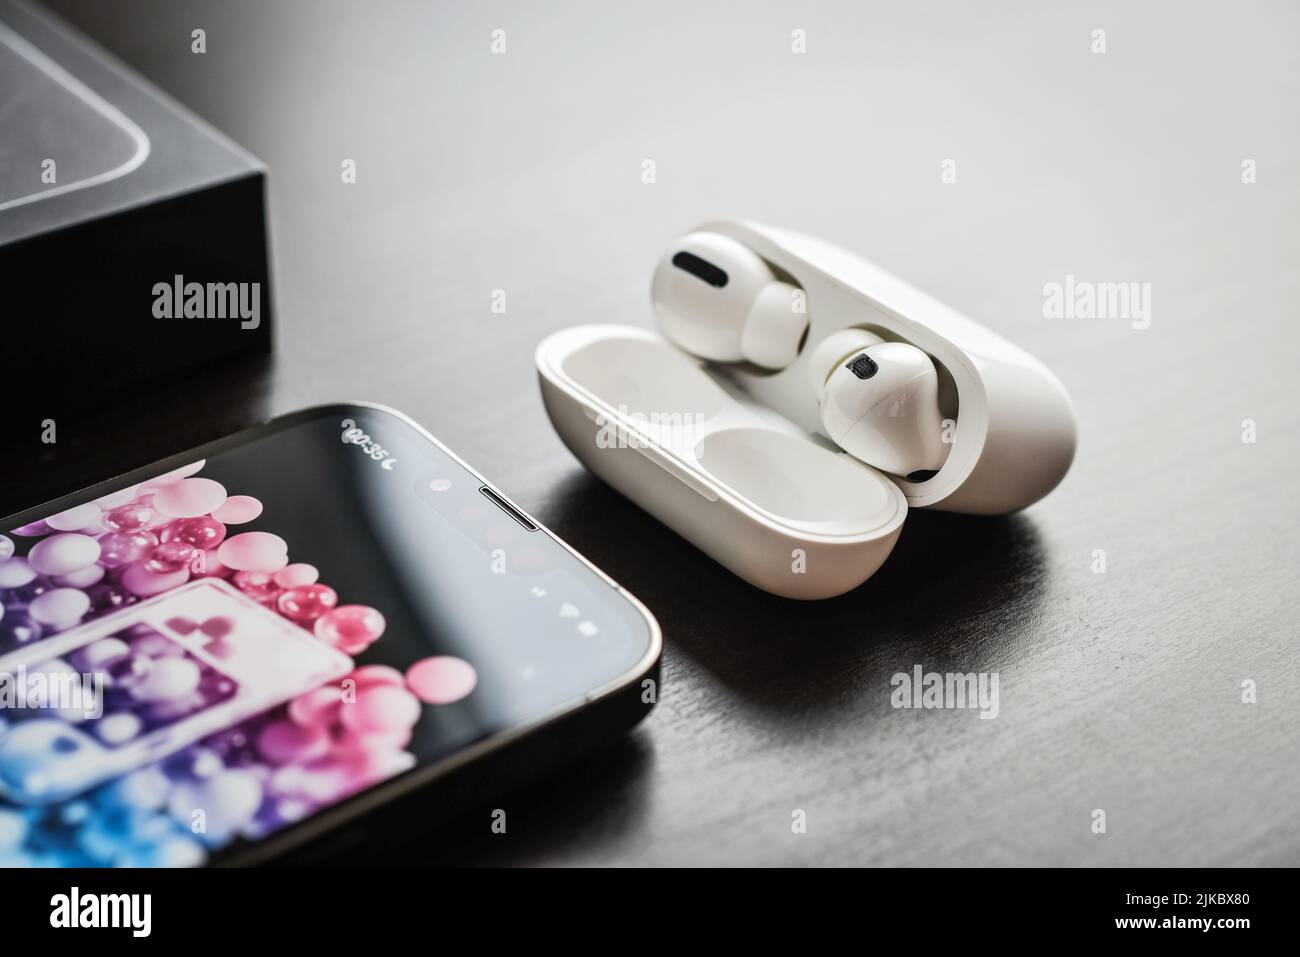 KIEV, UKRAINE - FEBRUARY 10, 2022:  Charging case and the new iPhone 13 Pro with Apple music app on screen next to New Apple Computers AirPods Pro hea Stock Photo